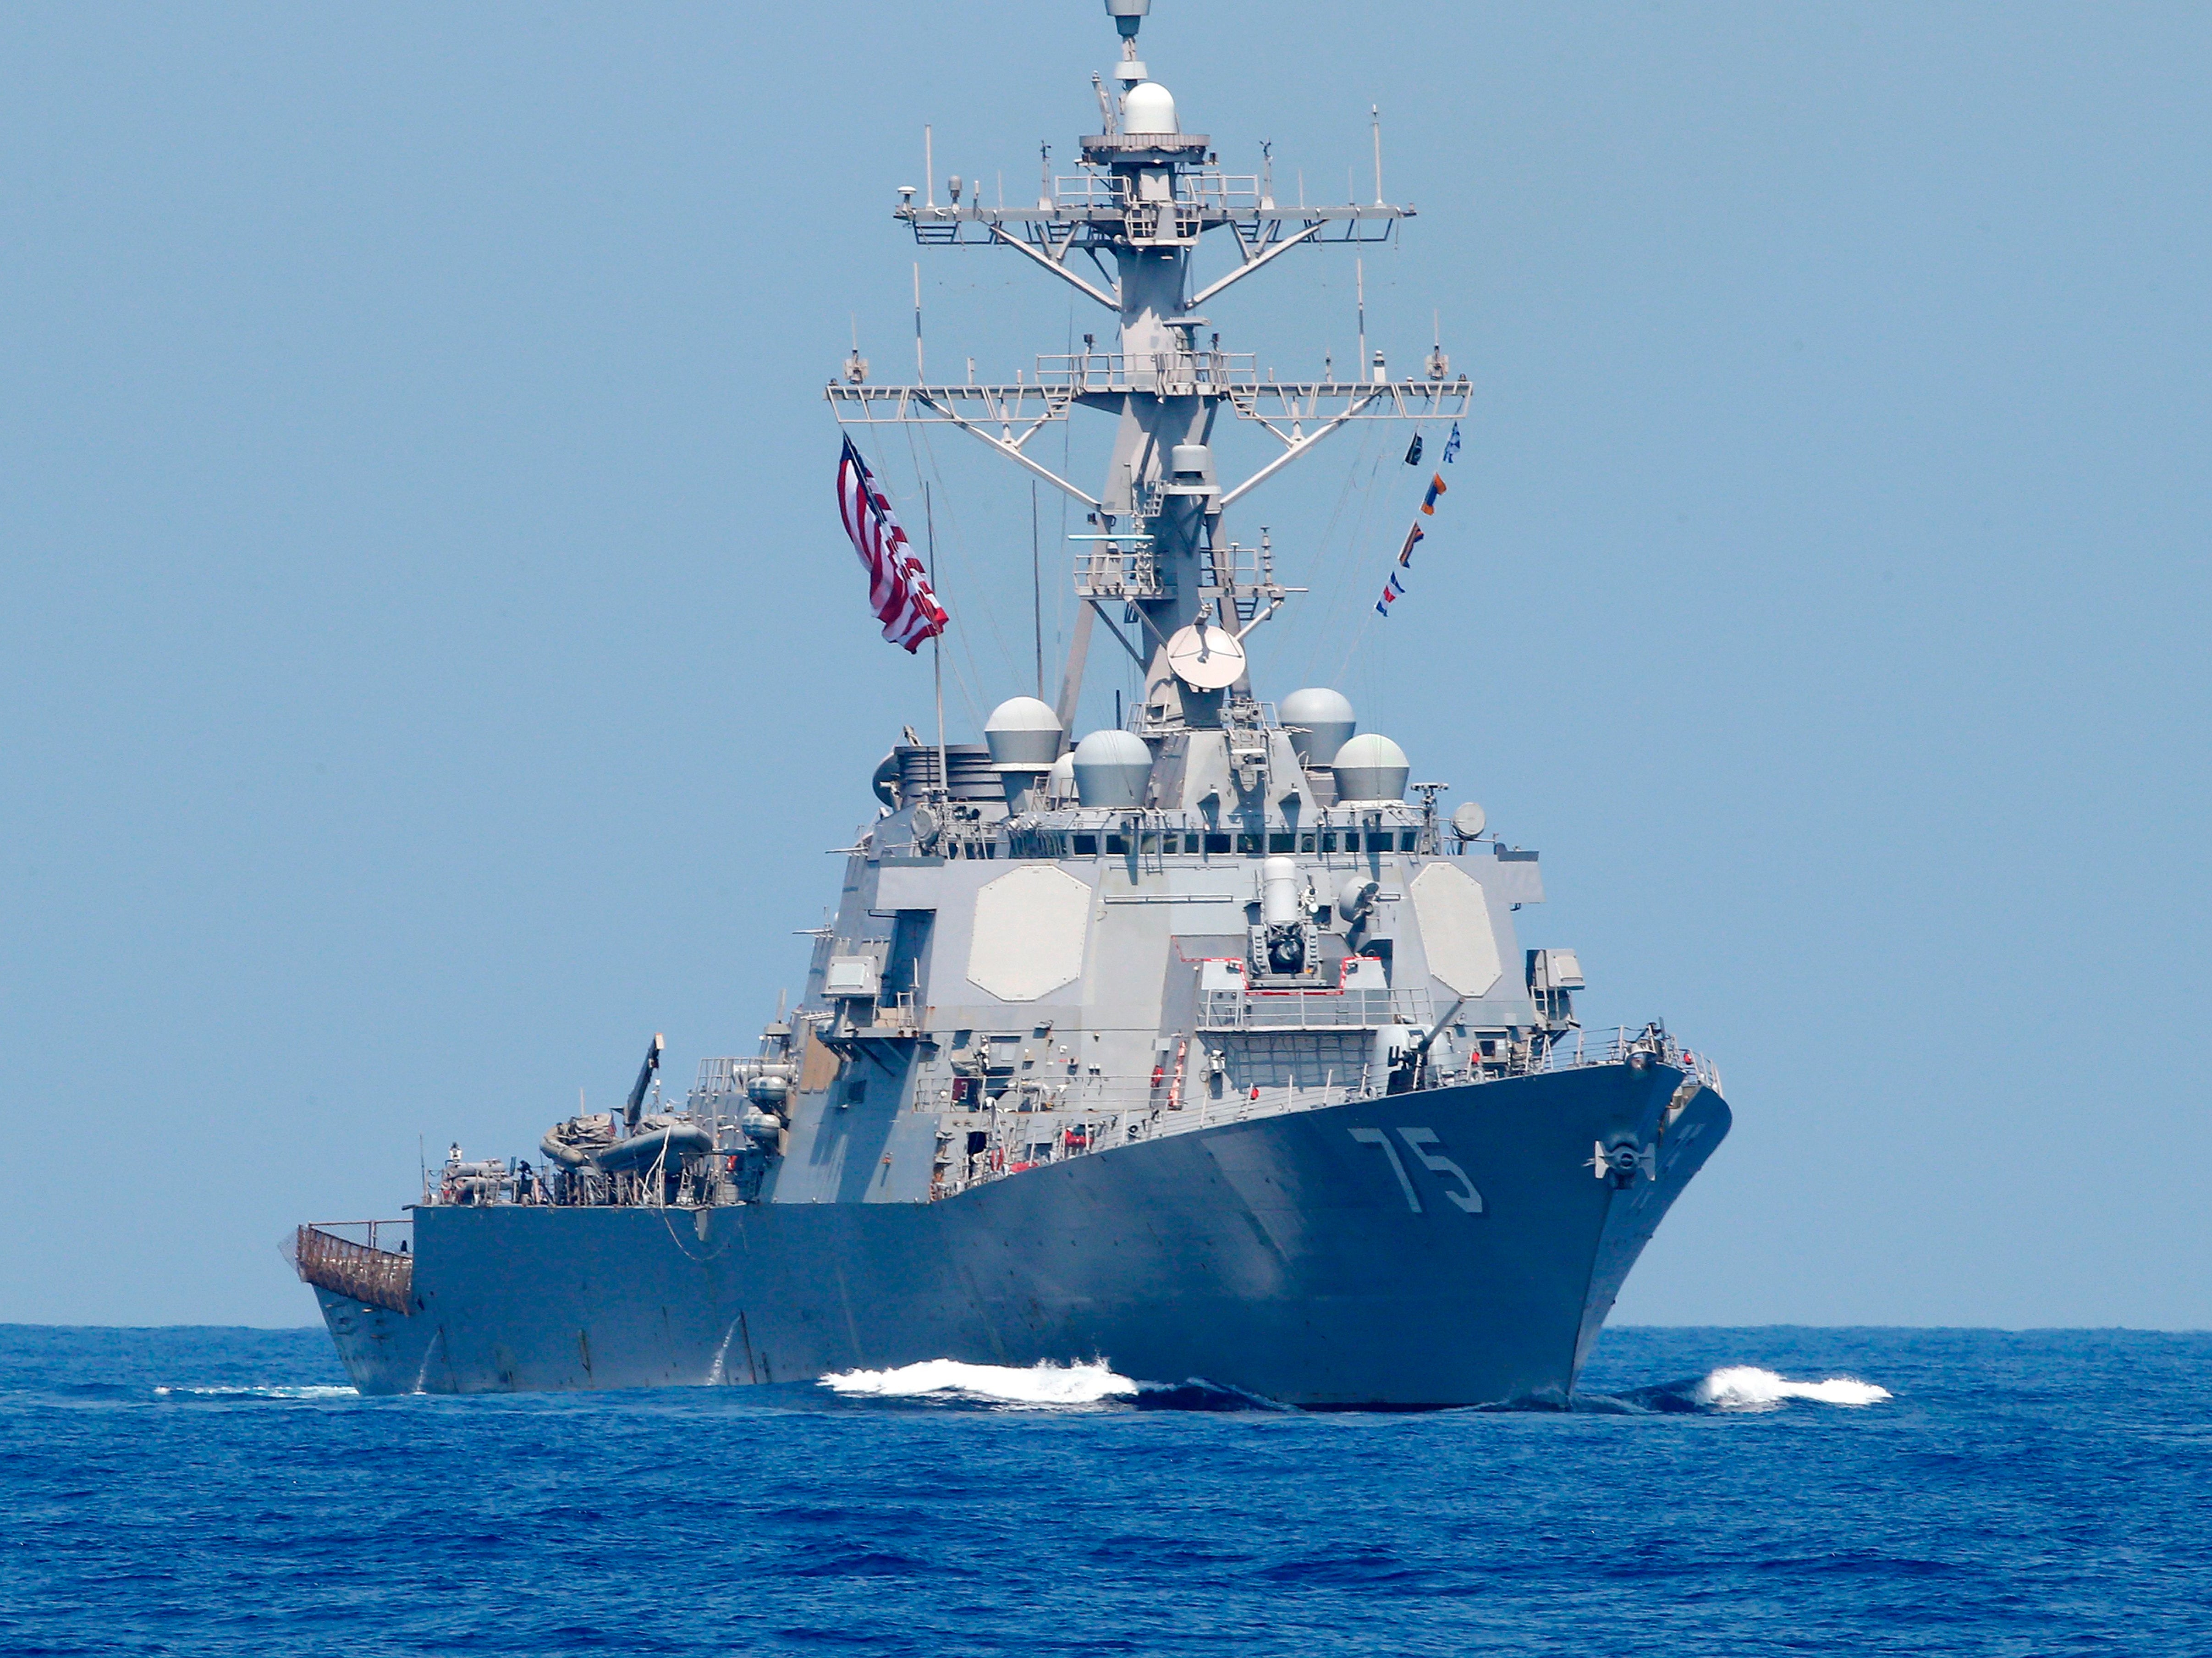 A photo taken on 7 August 2019, shows the US Navy USS Donald Cook class guided missile destroyer during an exercise